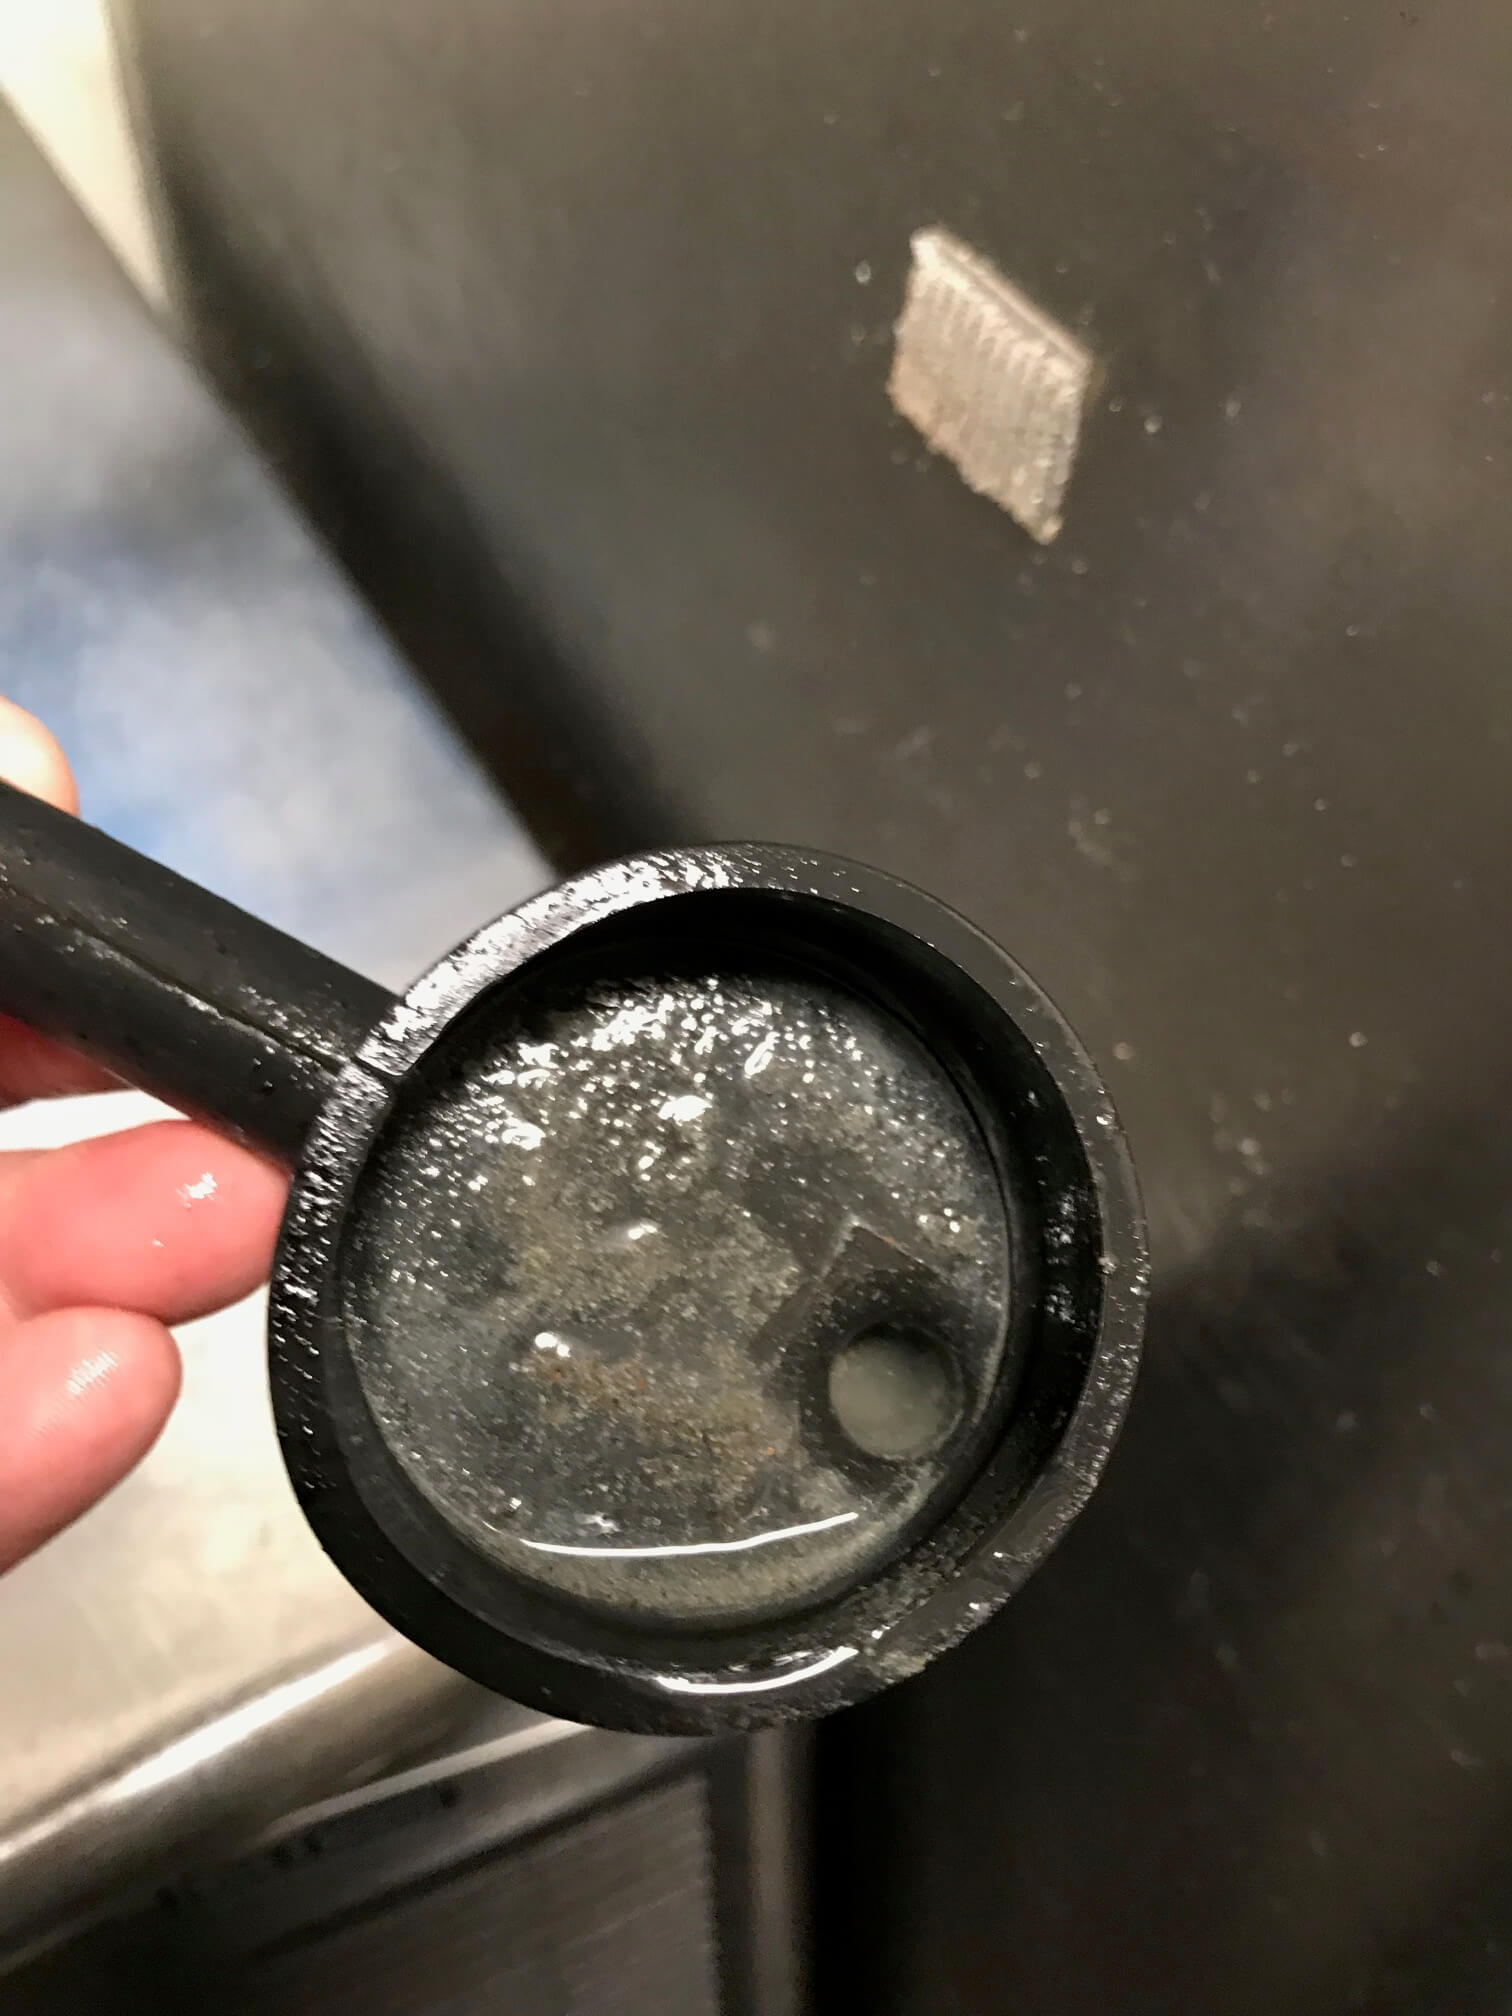 That doesn't look very appetizing, does it? Get regular maintenance from a commercial refrigeration contractor and ensre your equipment passes the smell test.